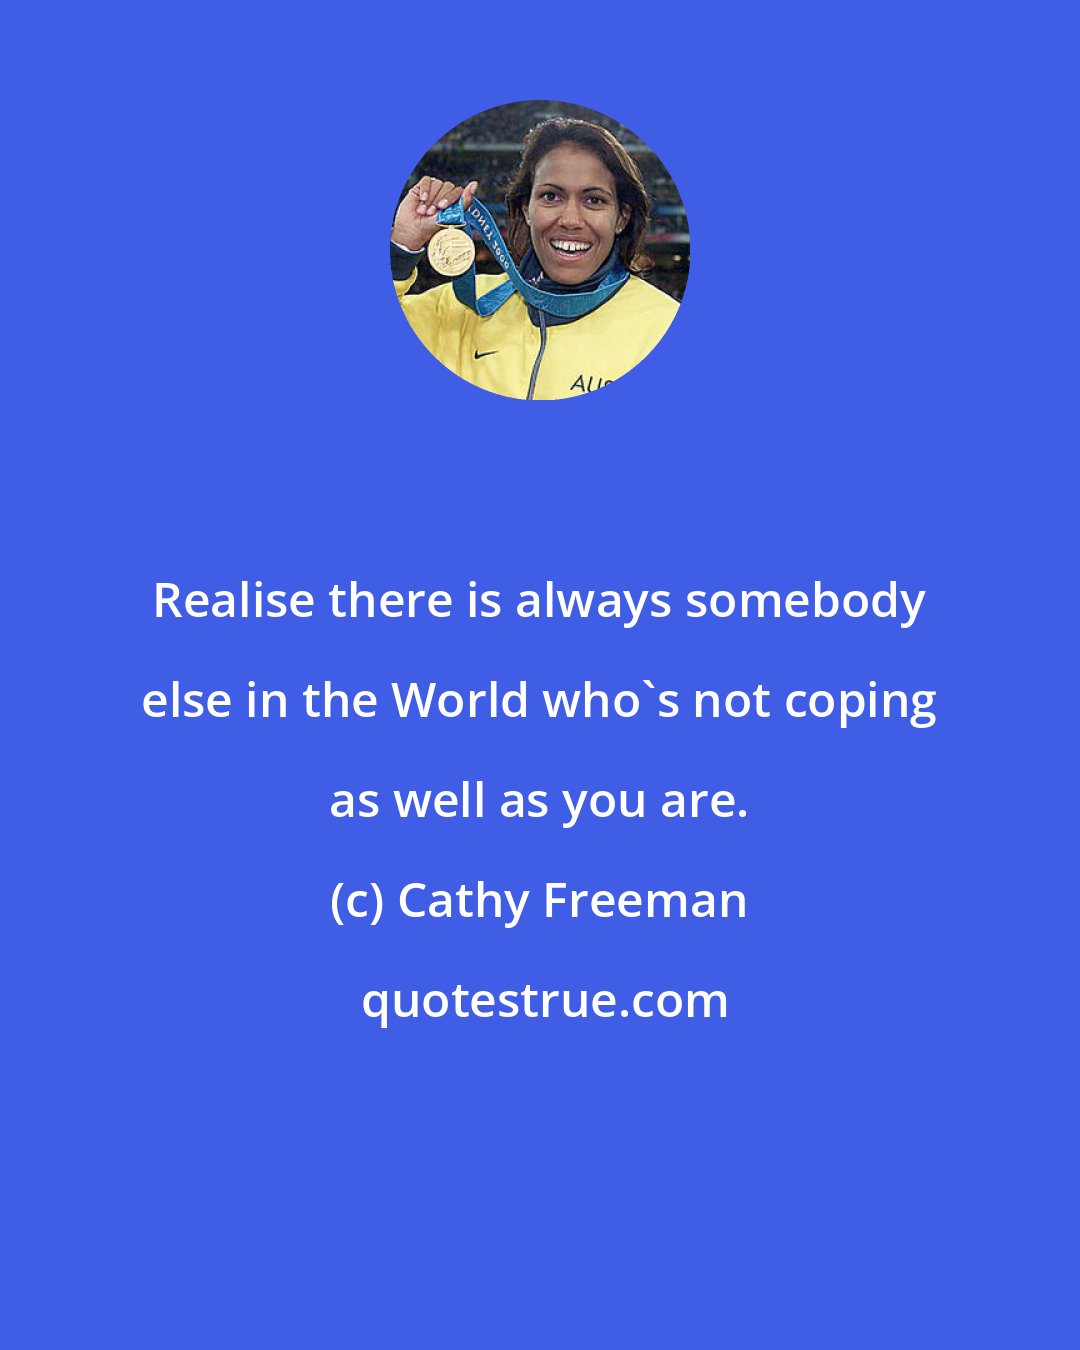 Cathy Freeman: Realise there is always somebody else in the World who's not coping as well as you are.